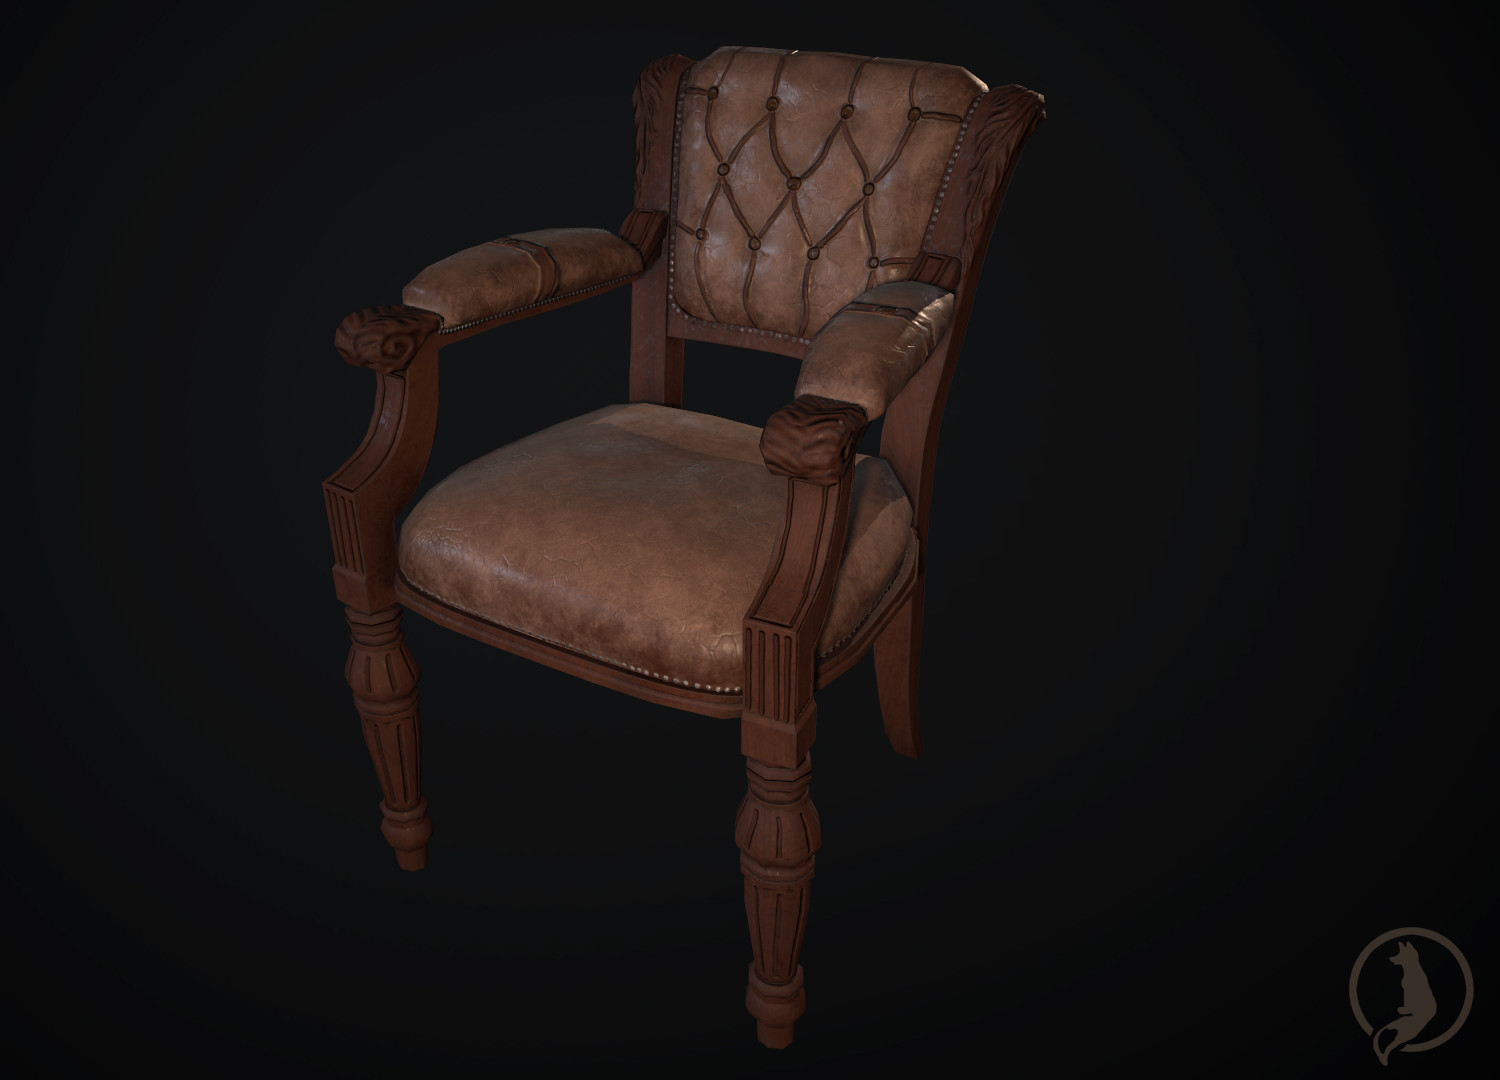 Victorian-era Inspired Leather Chair